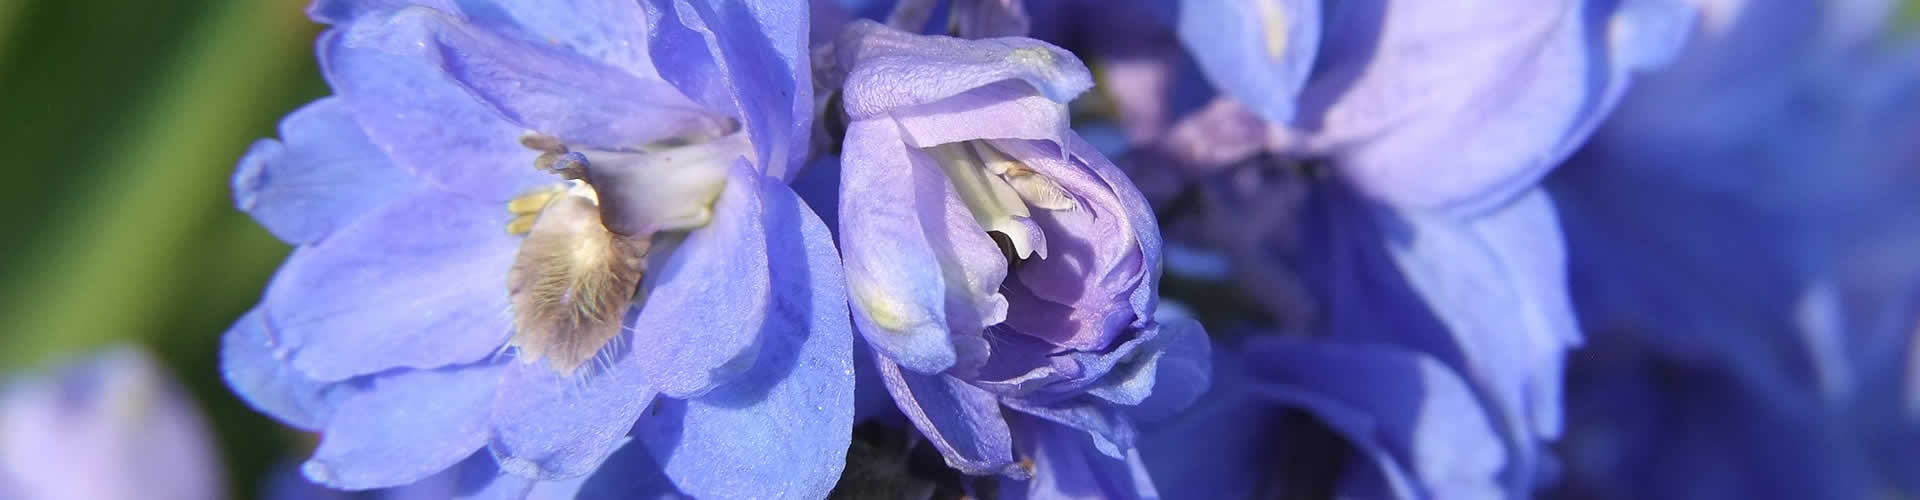 Larkspur is the traditional flower of July.